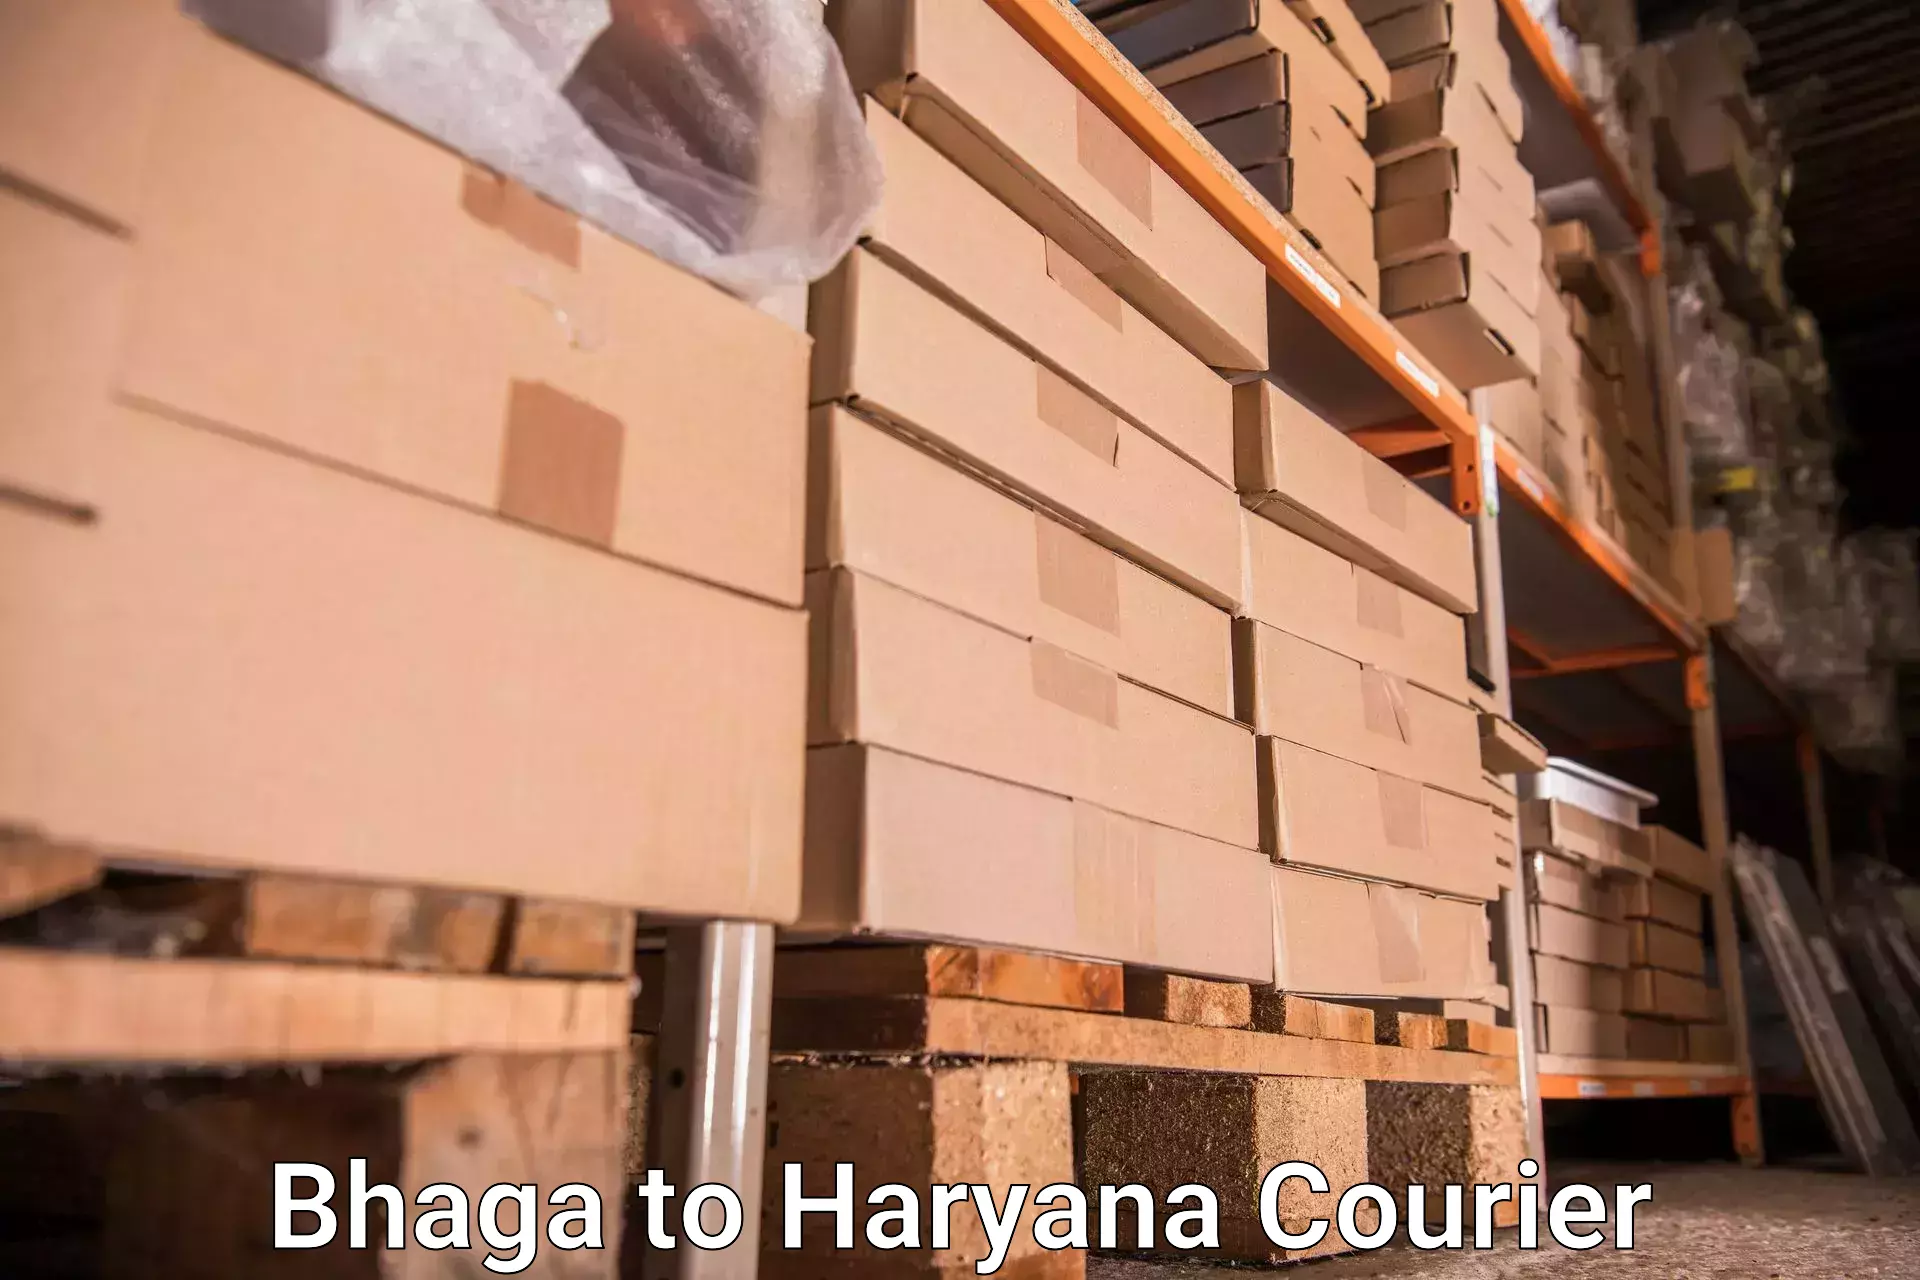 Baggage delivery solutions Bhaga to Gurgaon